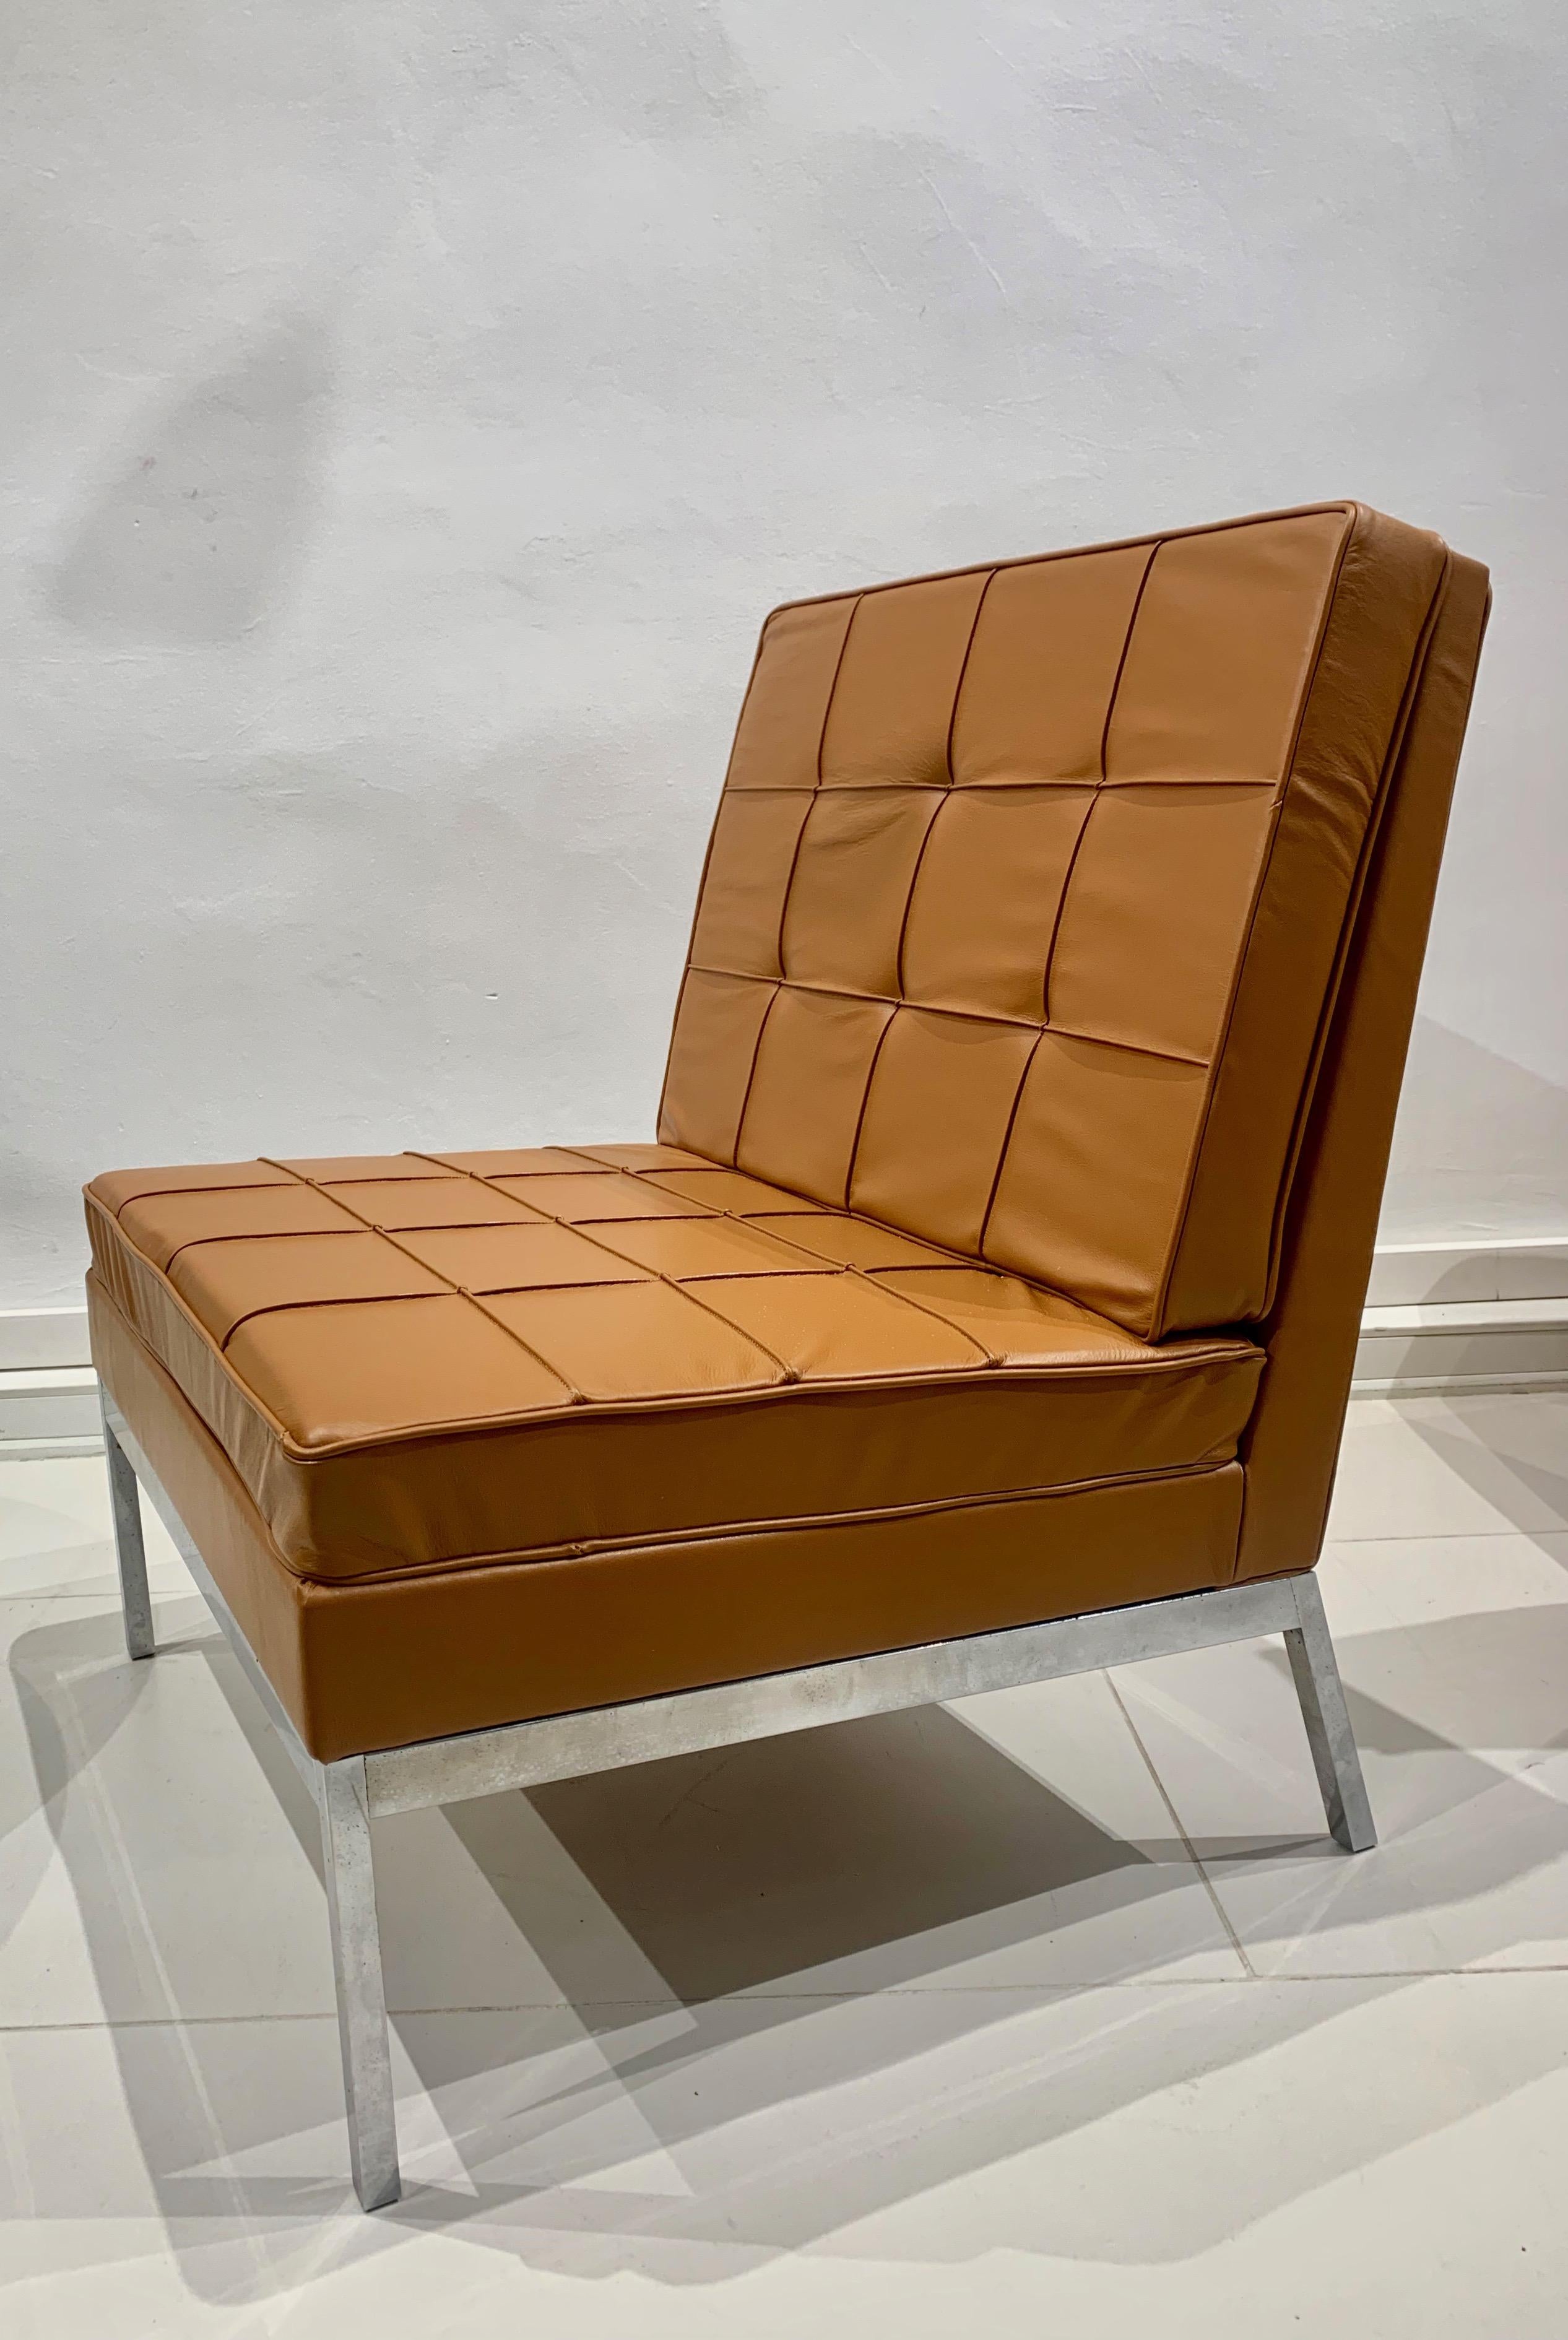 American Pair of Camel Leather Armchairs by Florence Knoll for Knoll For Sale